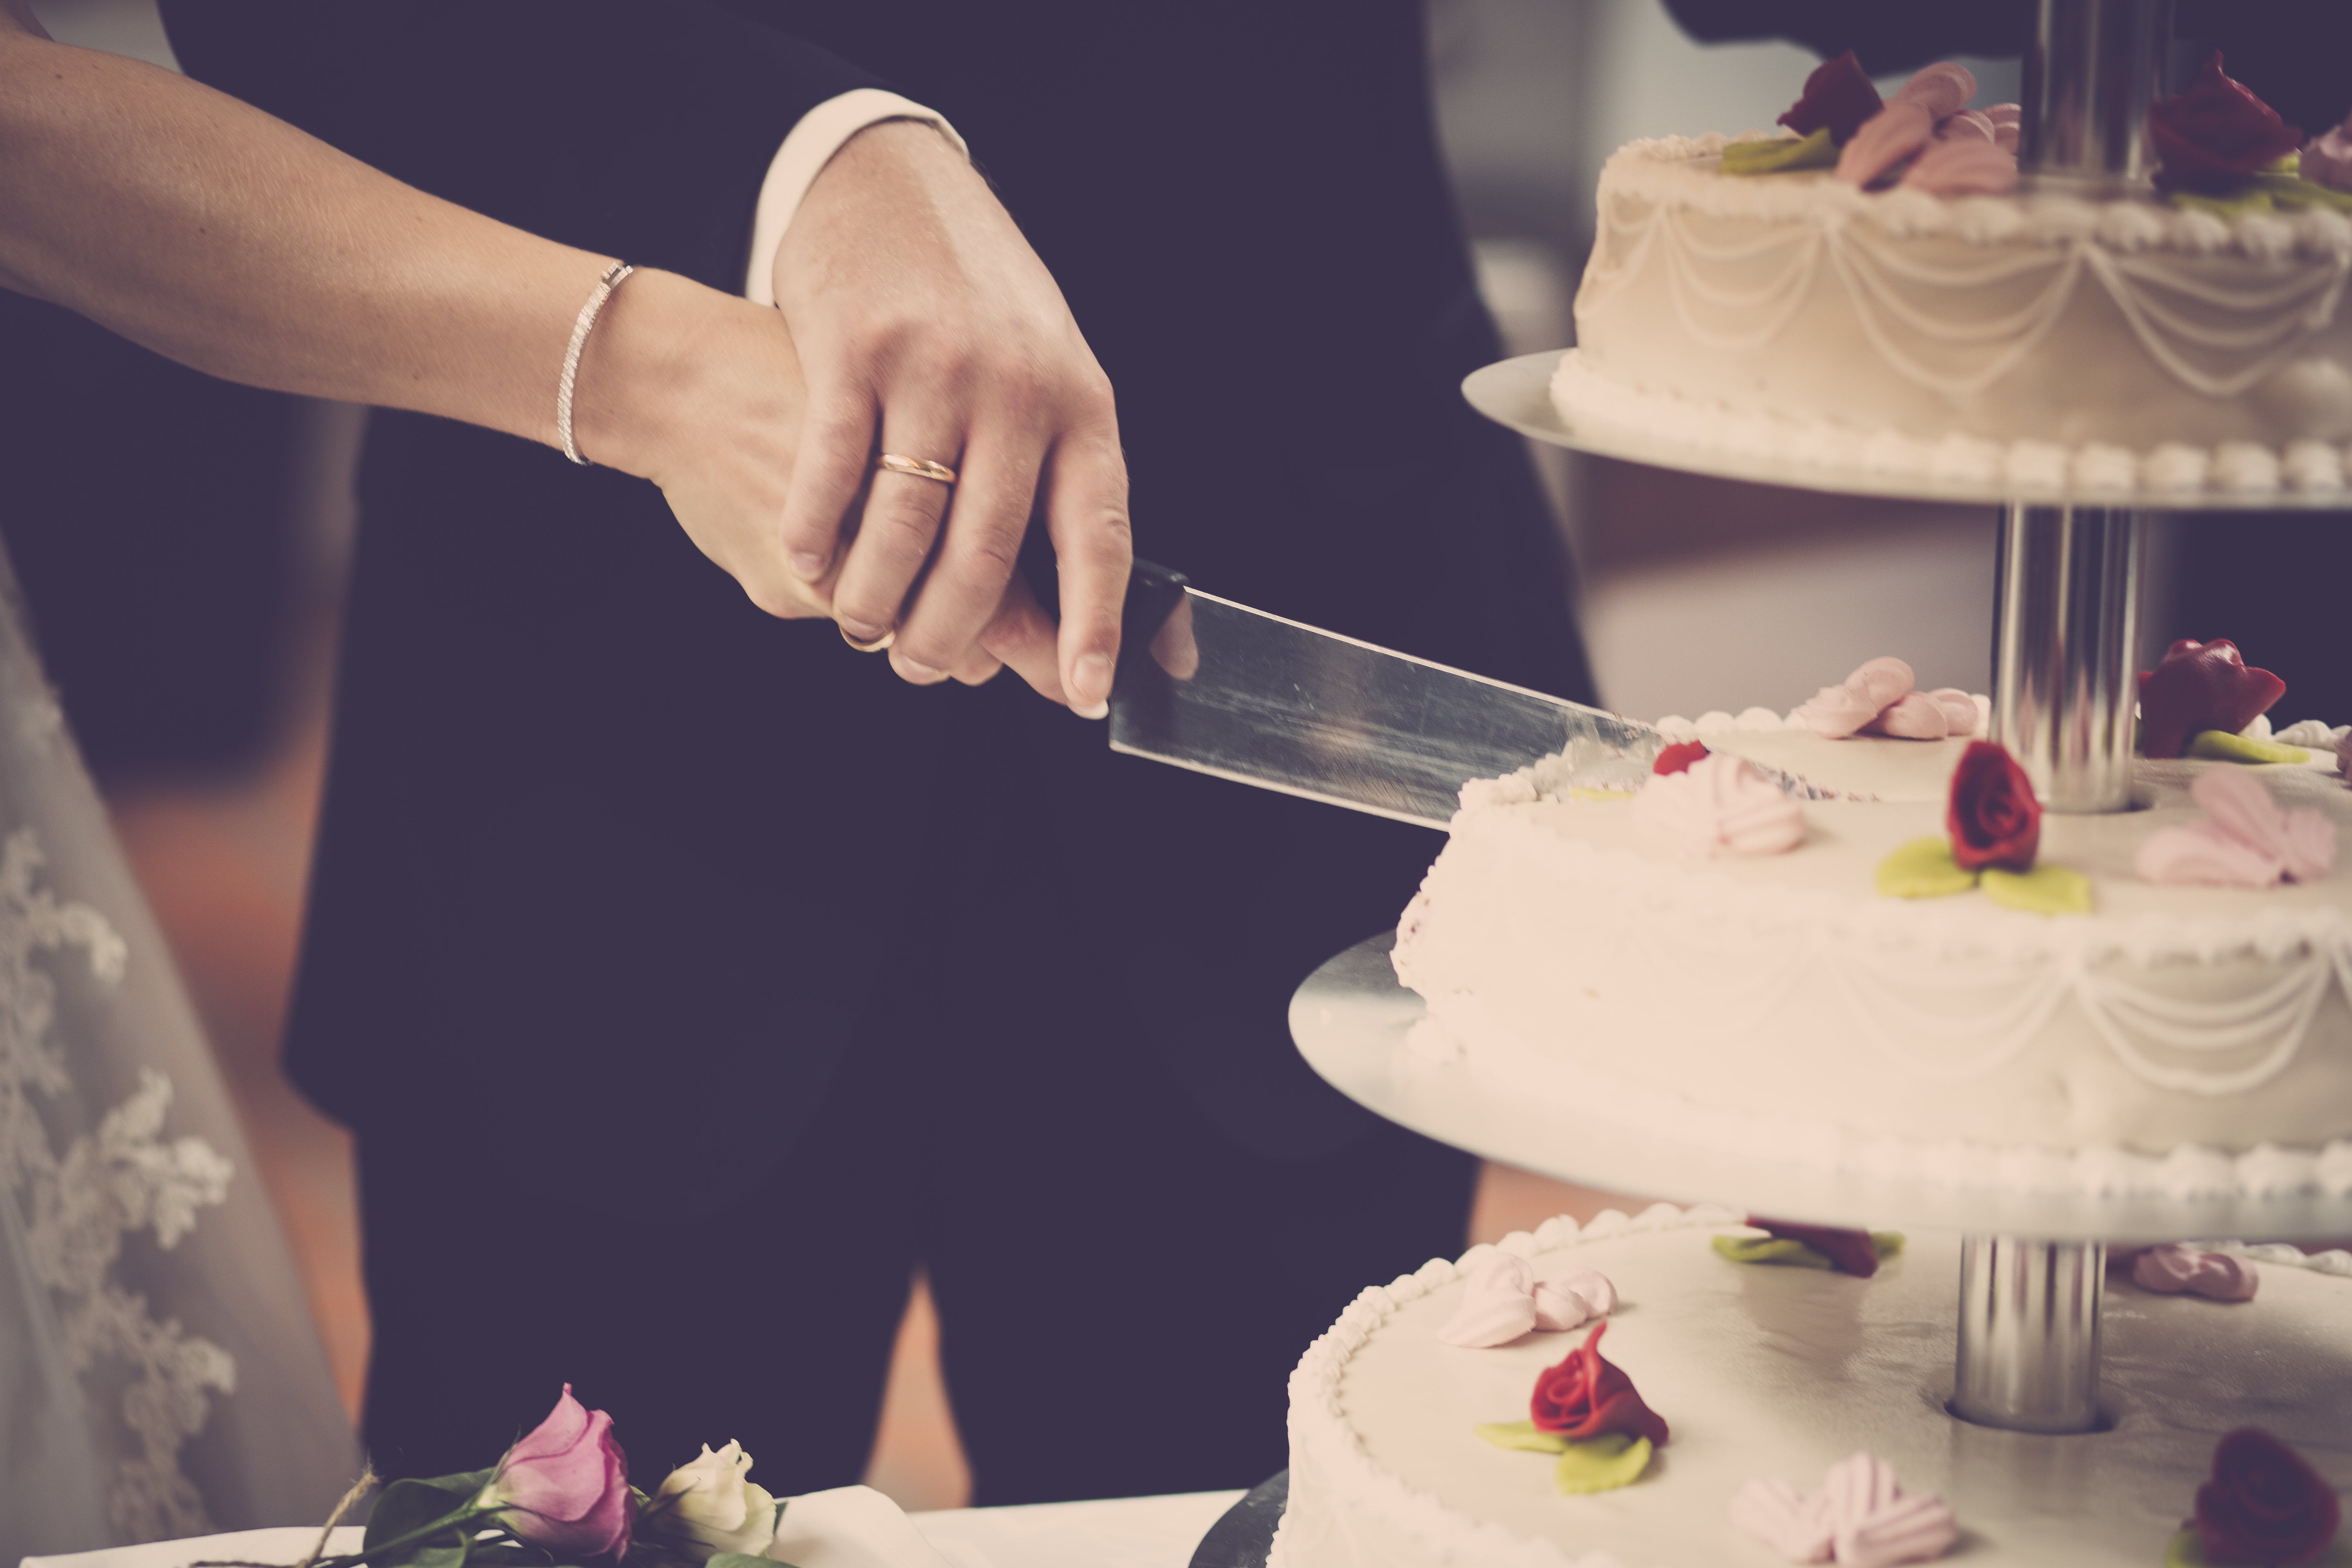 Free Person Holding Knife Slicing 3-layer Cake Stock Photo